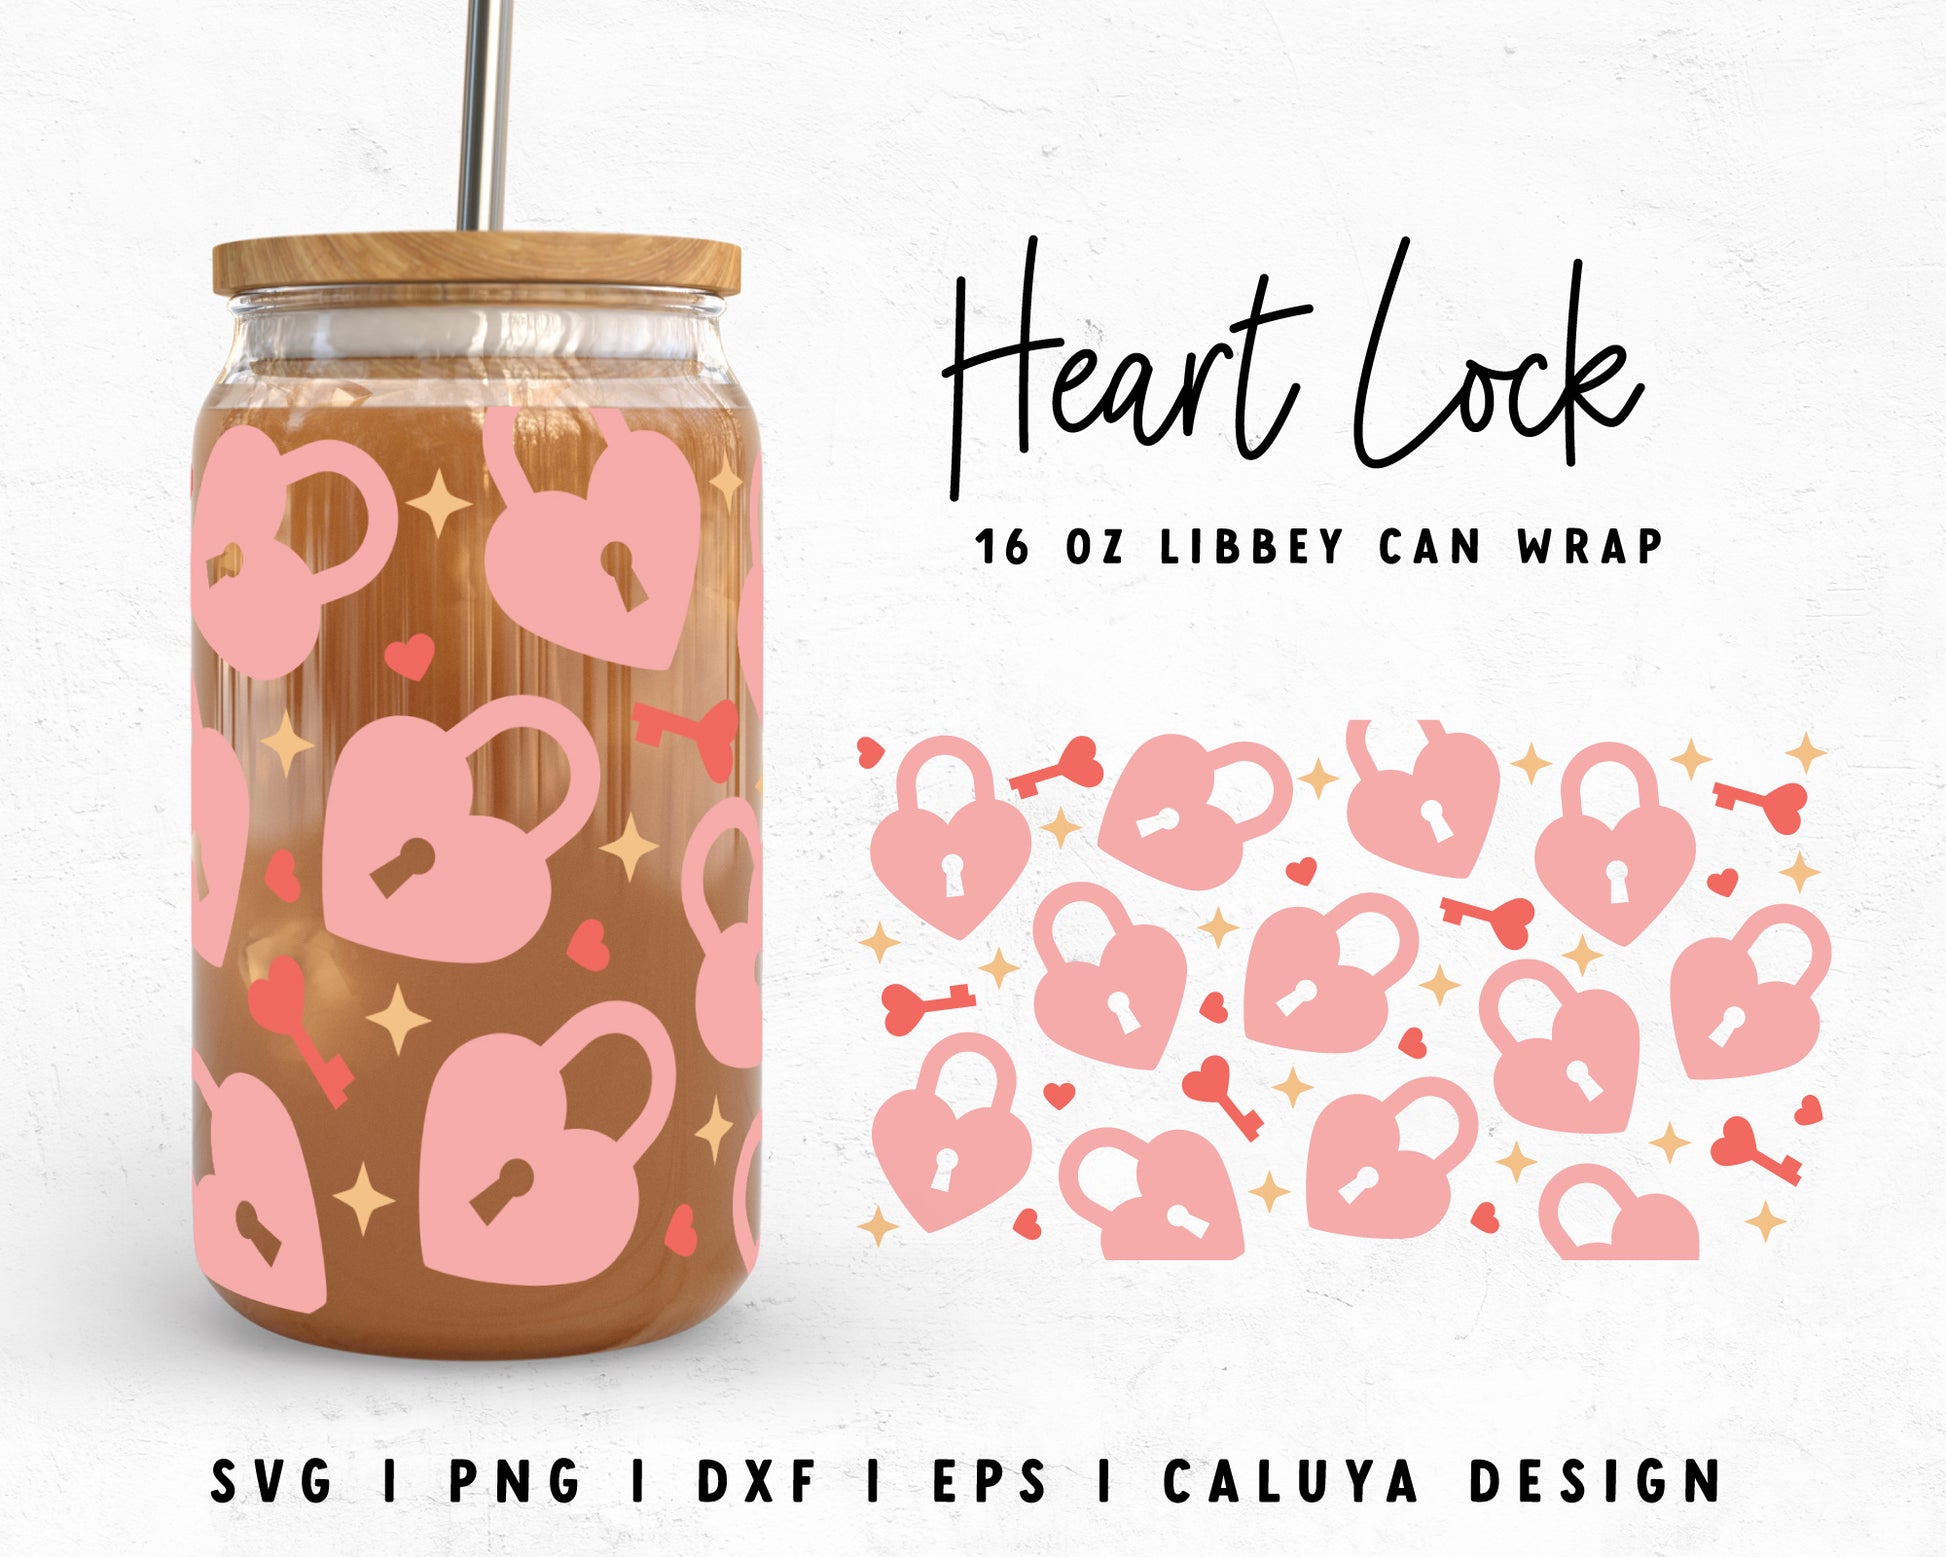 16oz Libbey Can Heart Lock Cup Wrap Cut File for Cricut, Cameo Silhouette | Free SVG Cut File